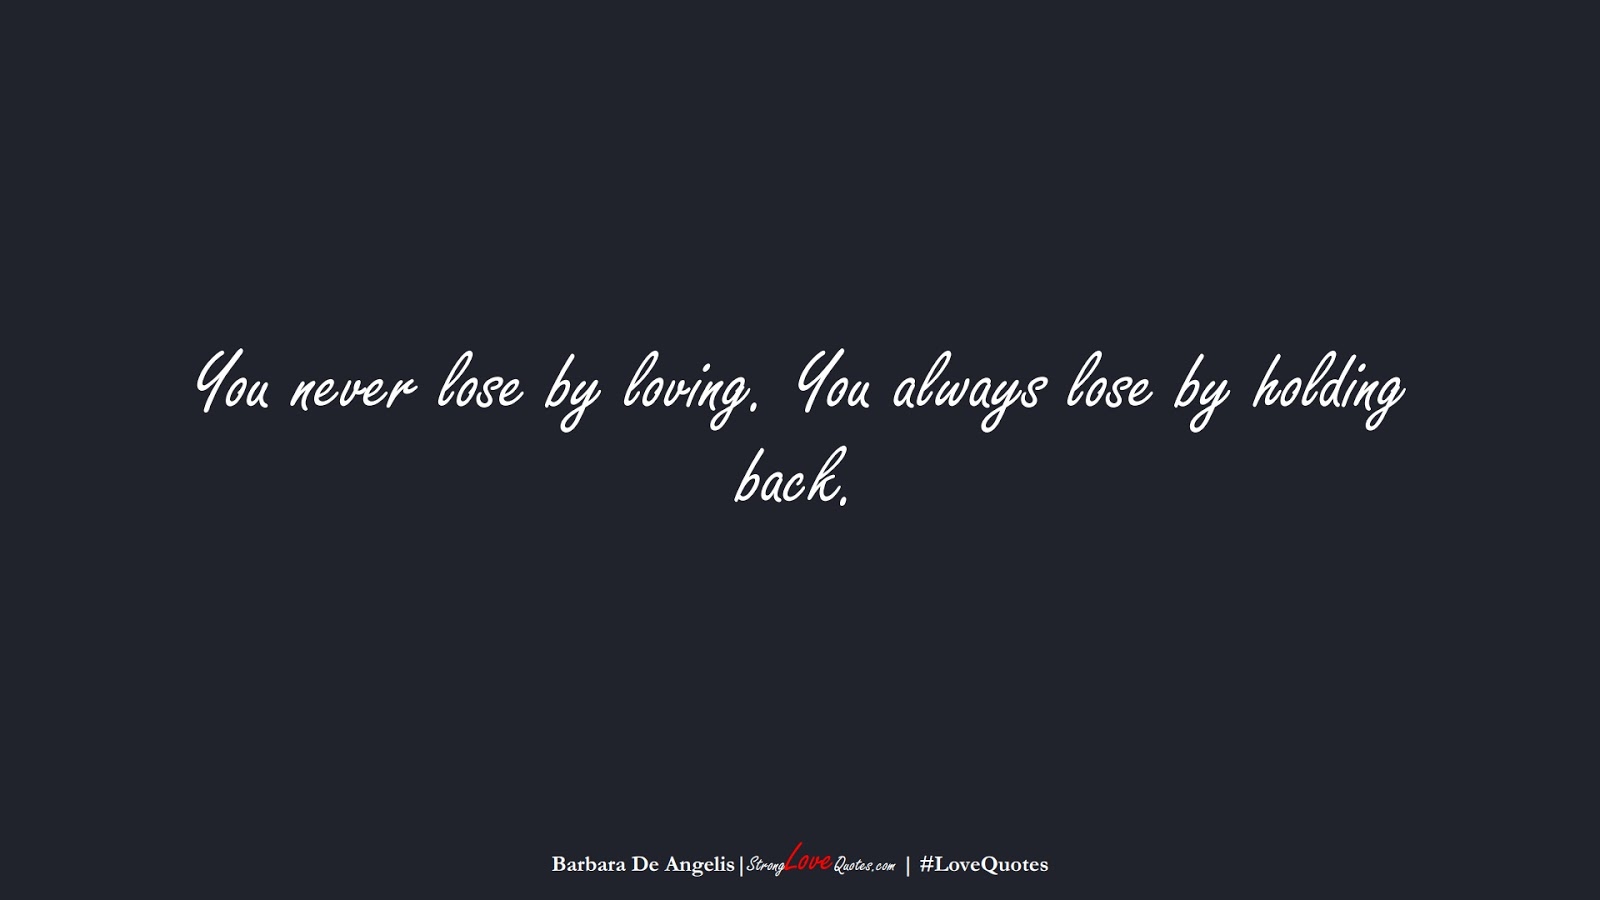 You never lose by loving. You always lose by holding back. (Barbara De Angelis);  #LoveQuotes